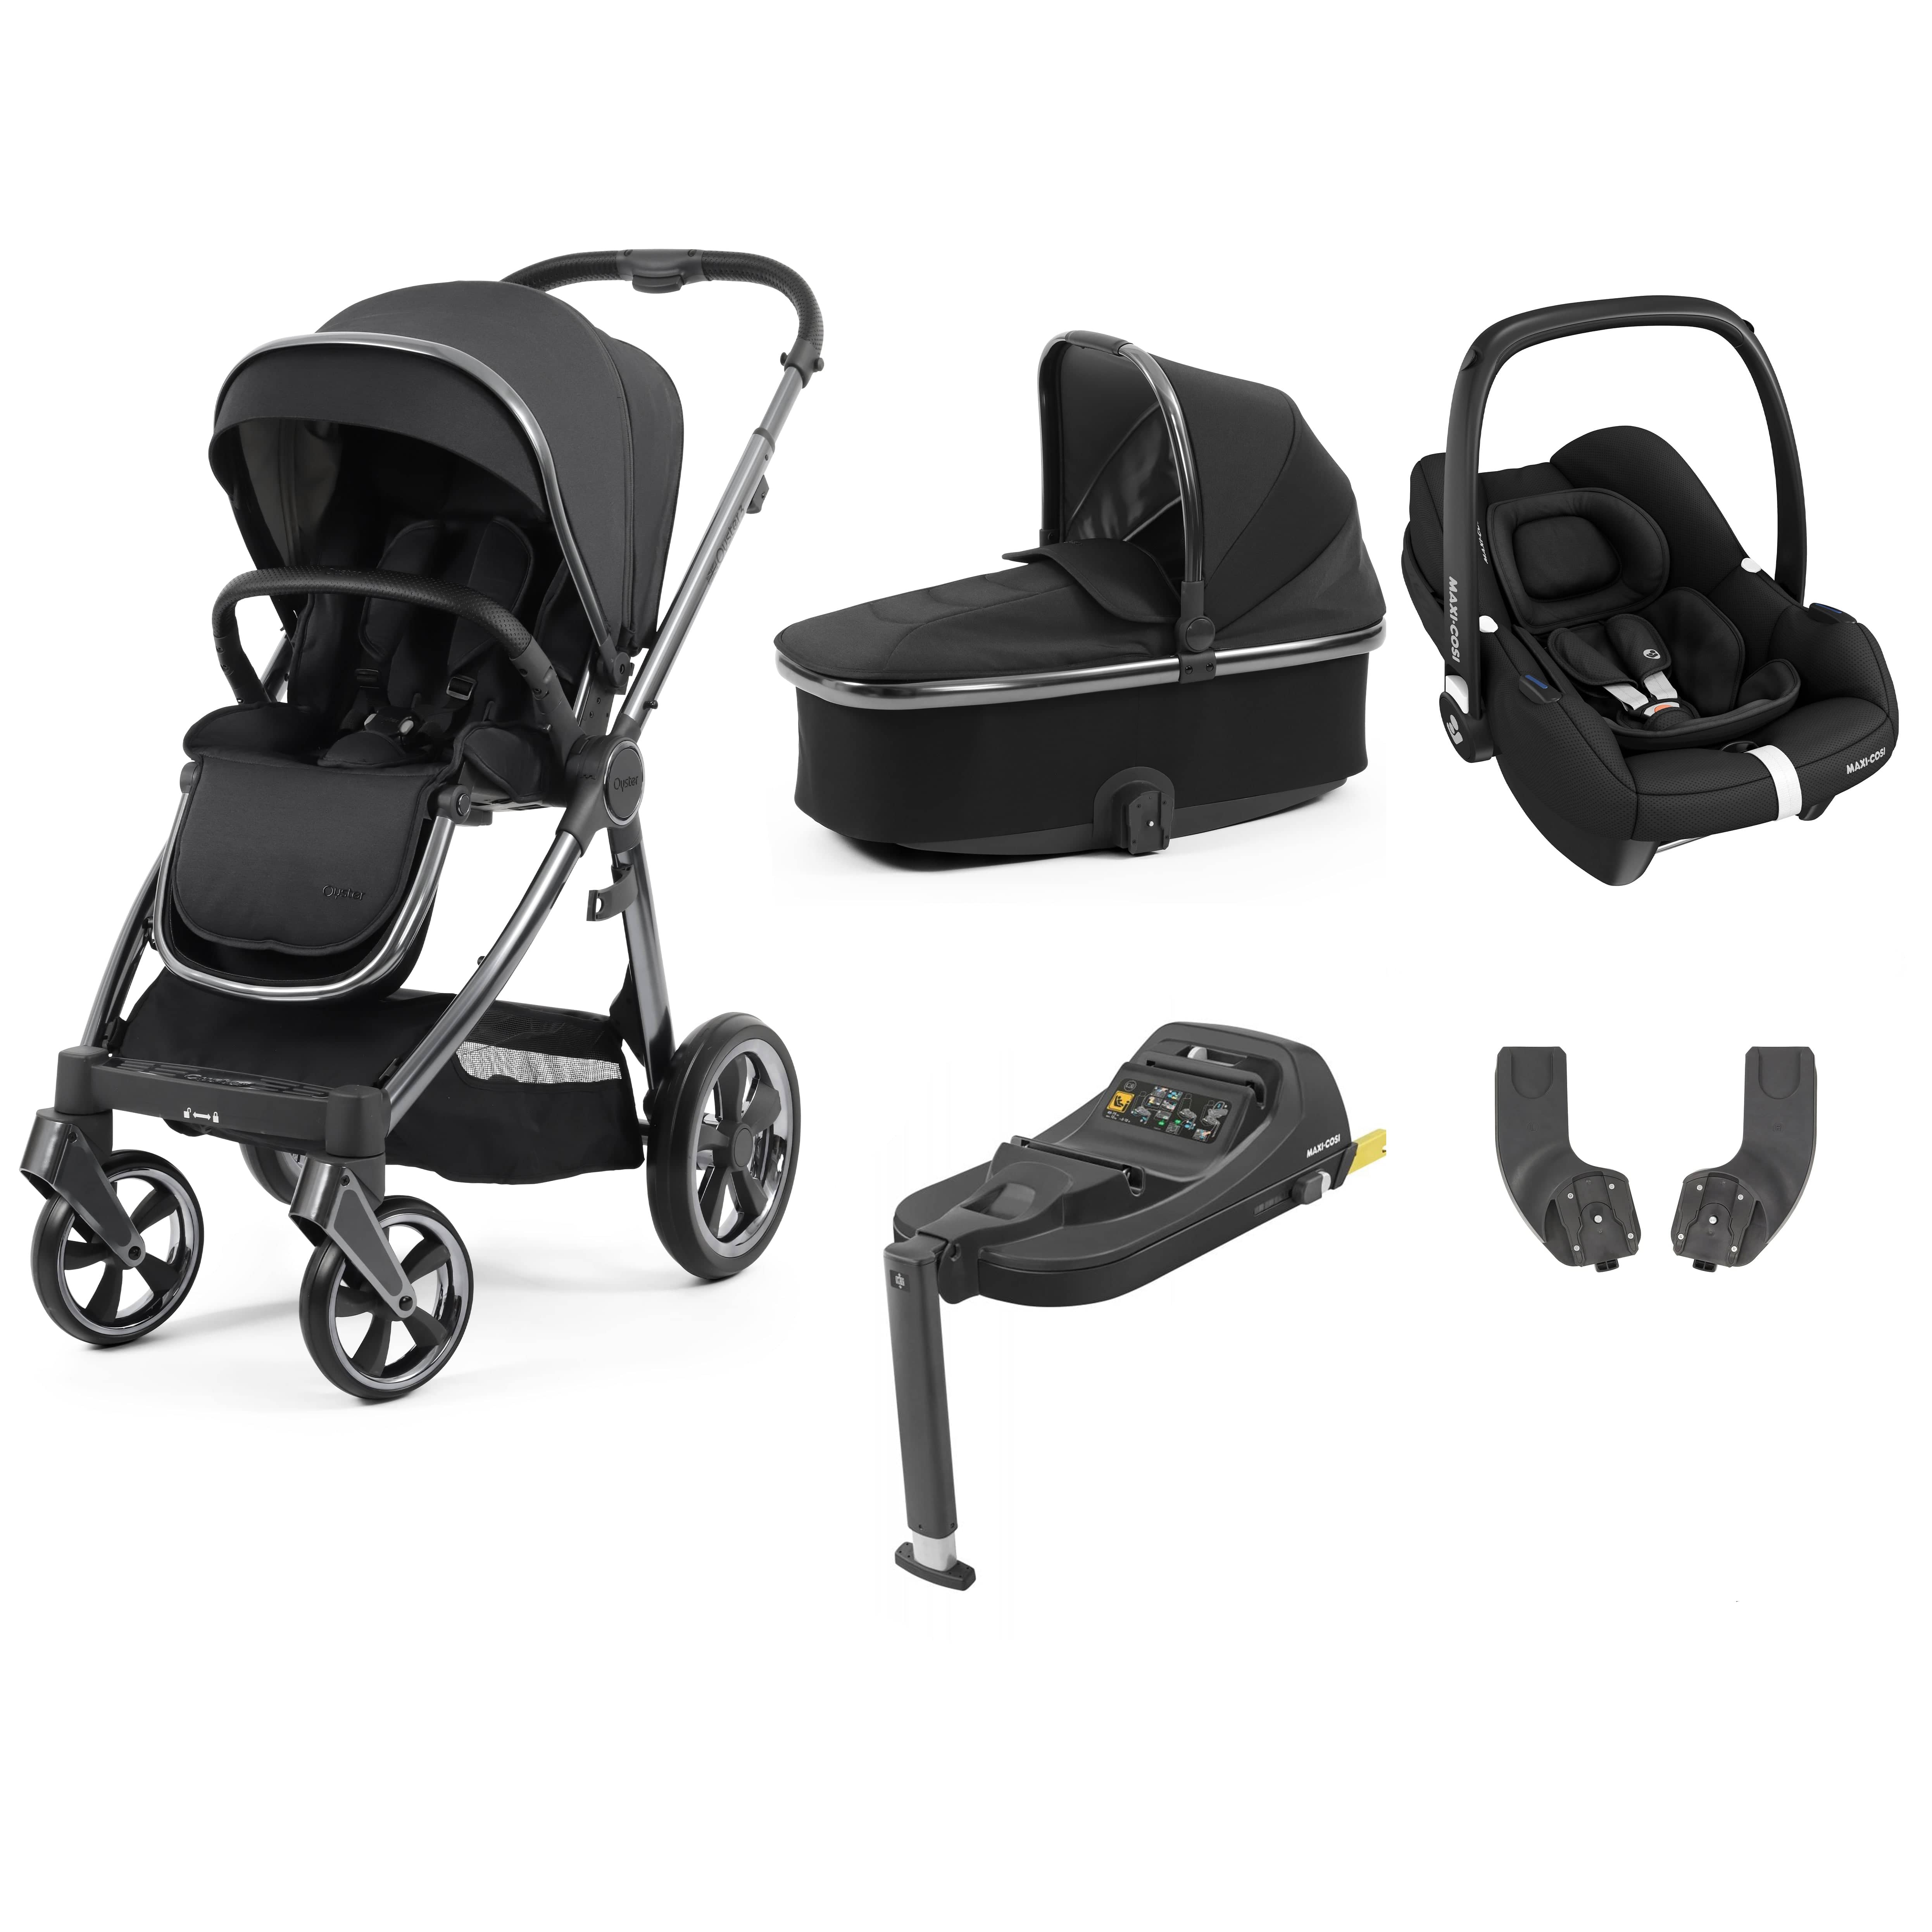 BabyStyle travel systems Babystyle Oyster 3 Essential Bundle with Car Seat - Carbonite 14764-CRB